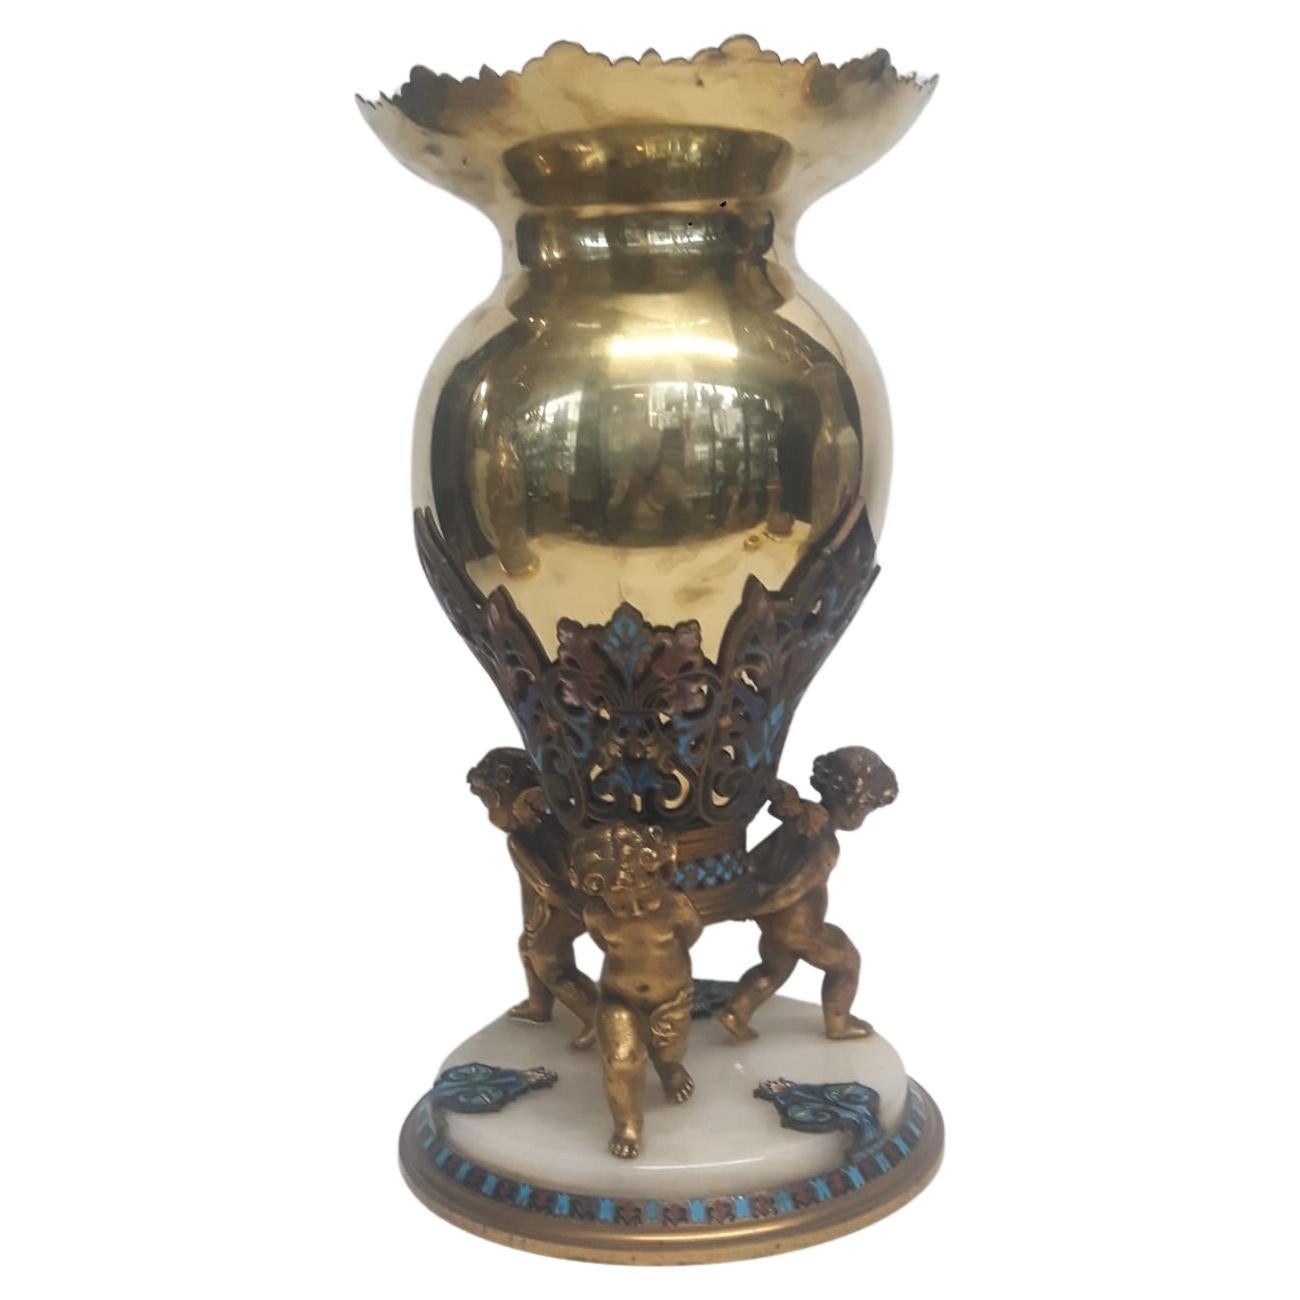 An antique French champlevé enamelled vase with a polished gilt metal body 